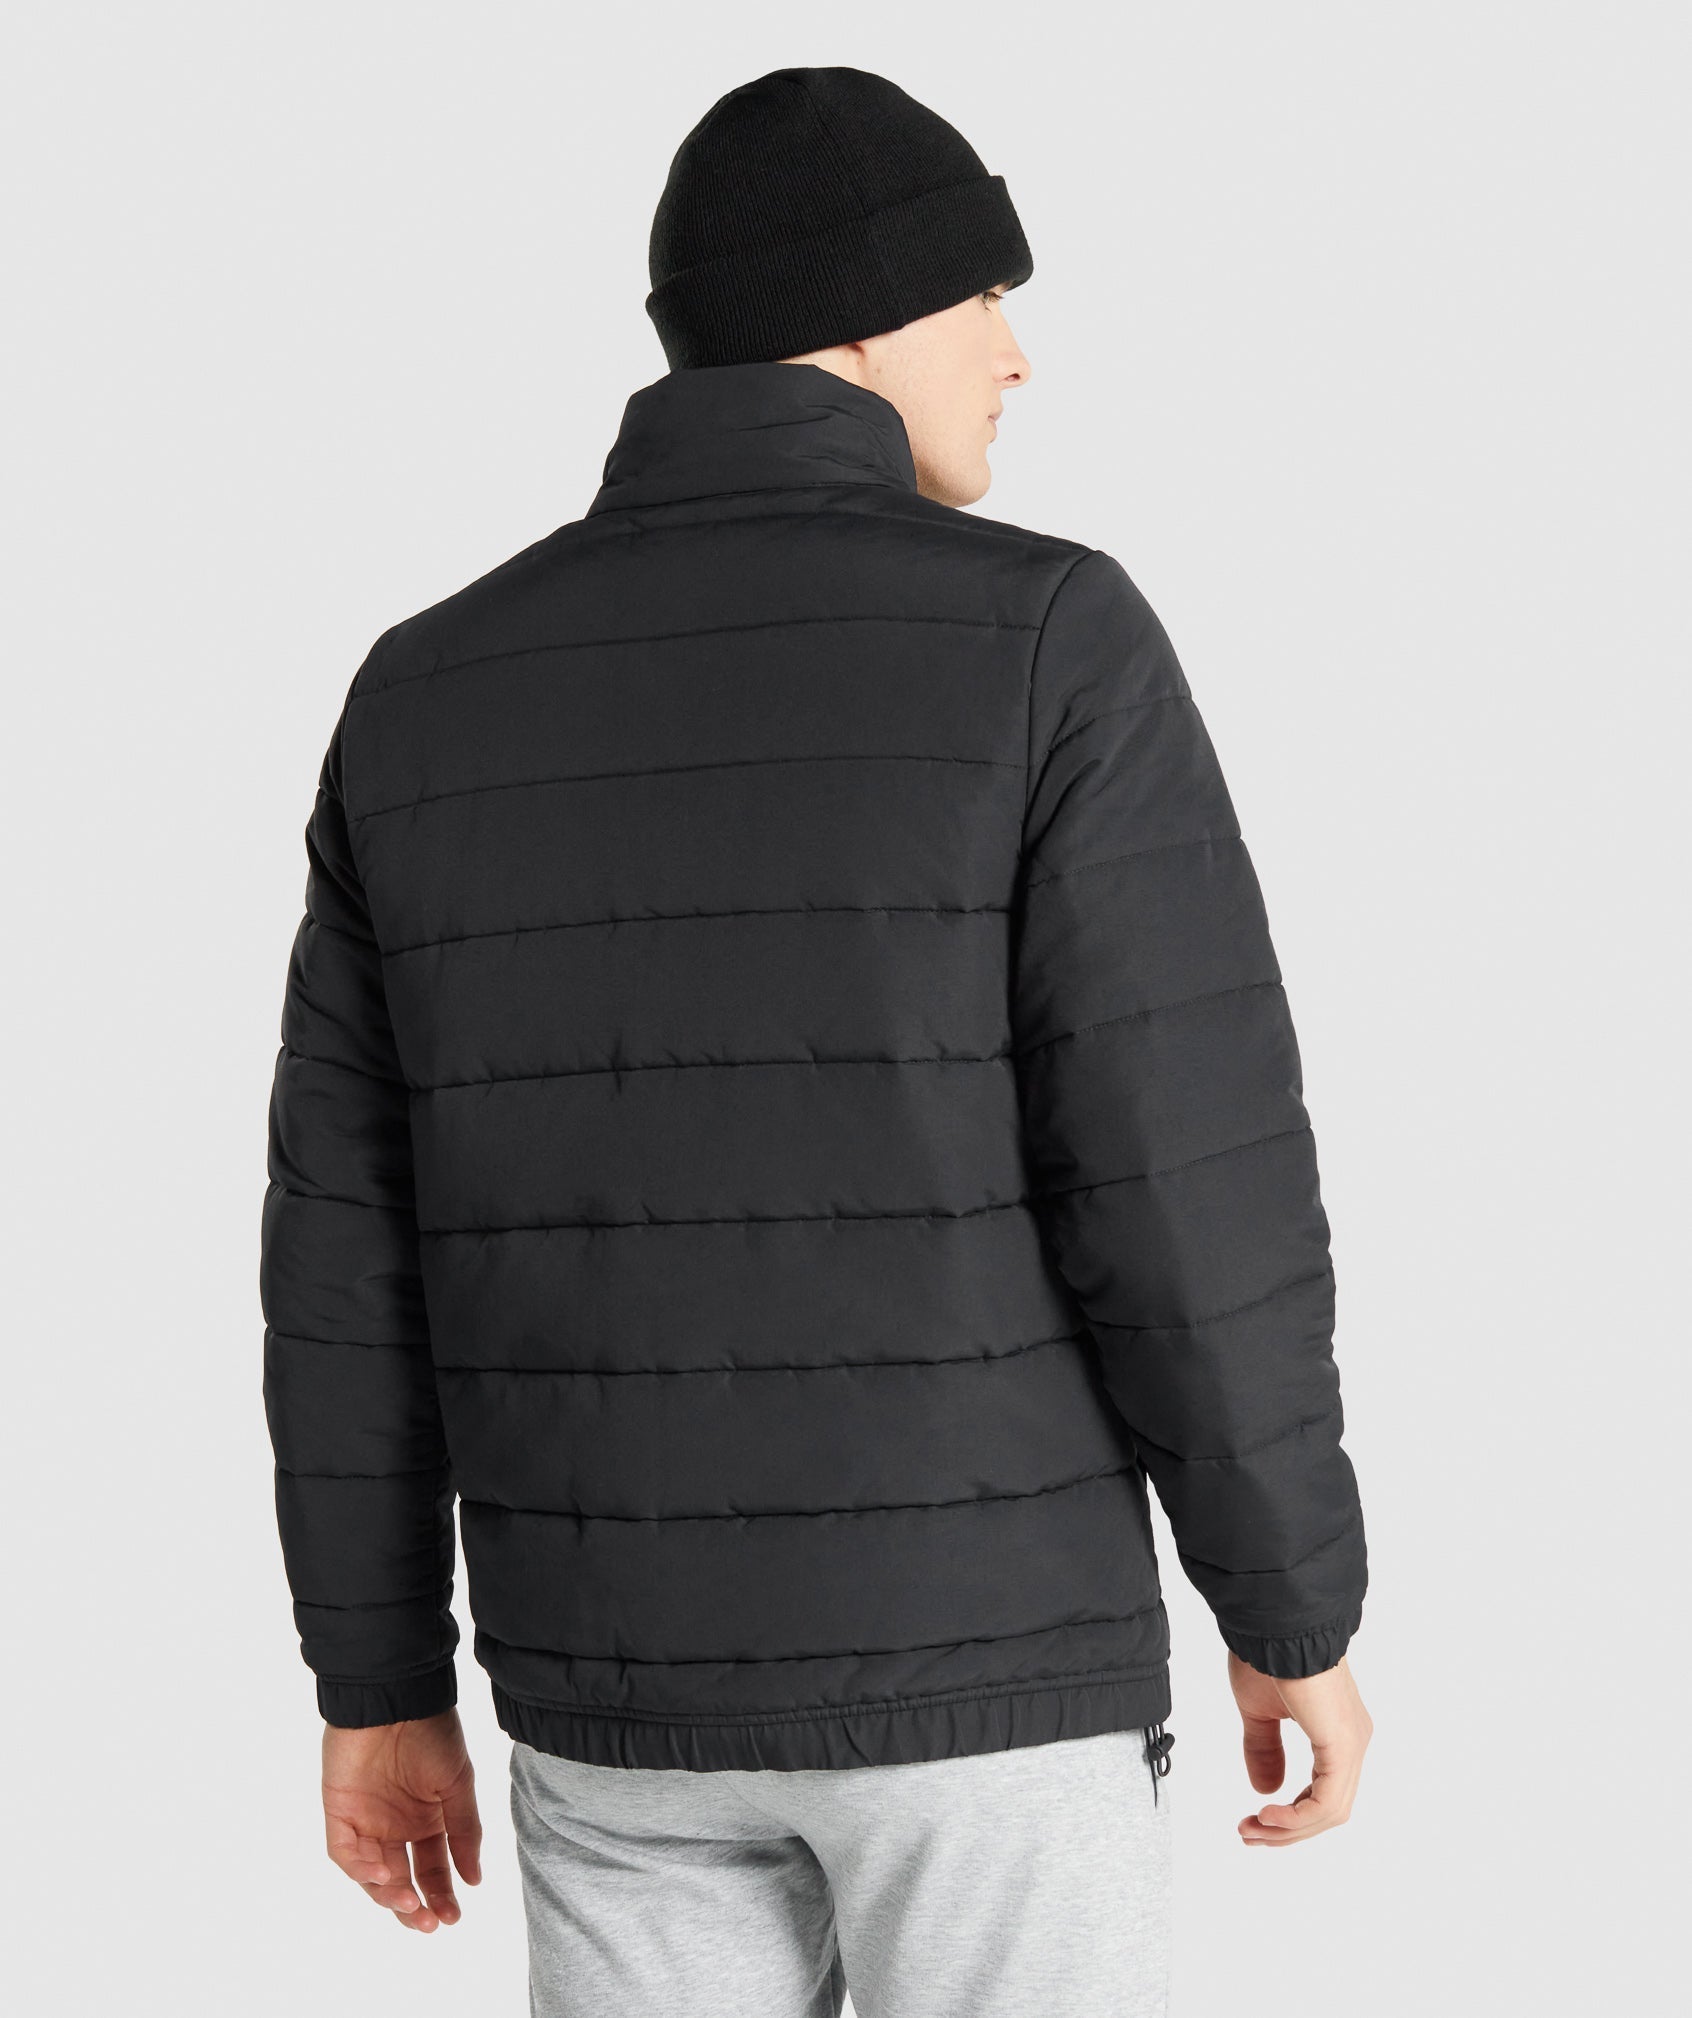 Crest Padded Jacket in Black - view 3